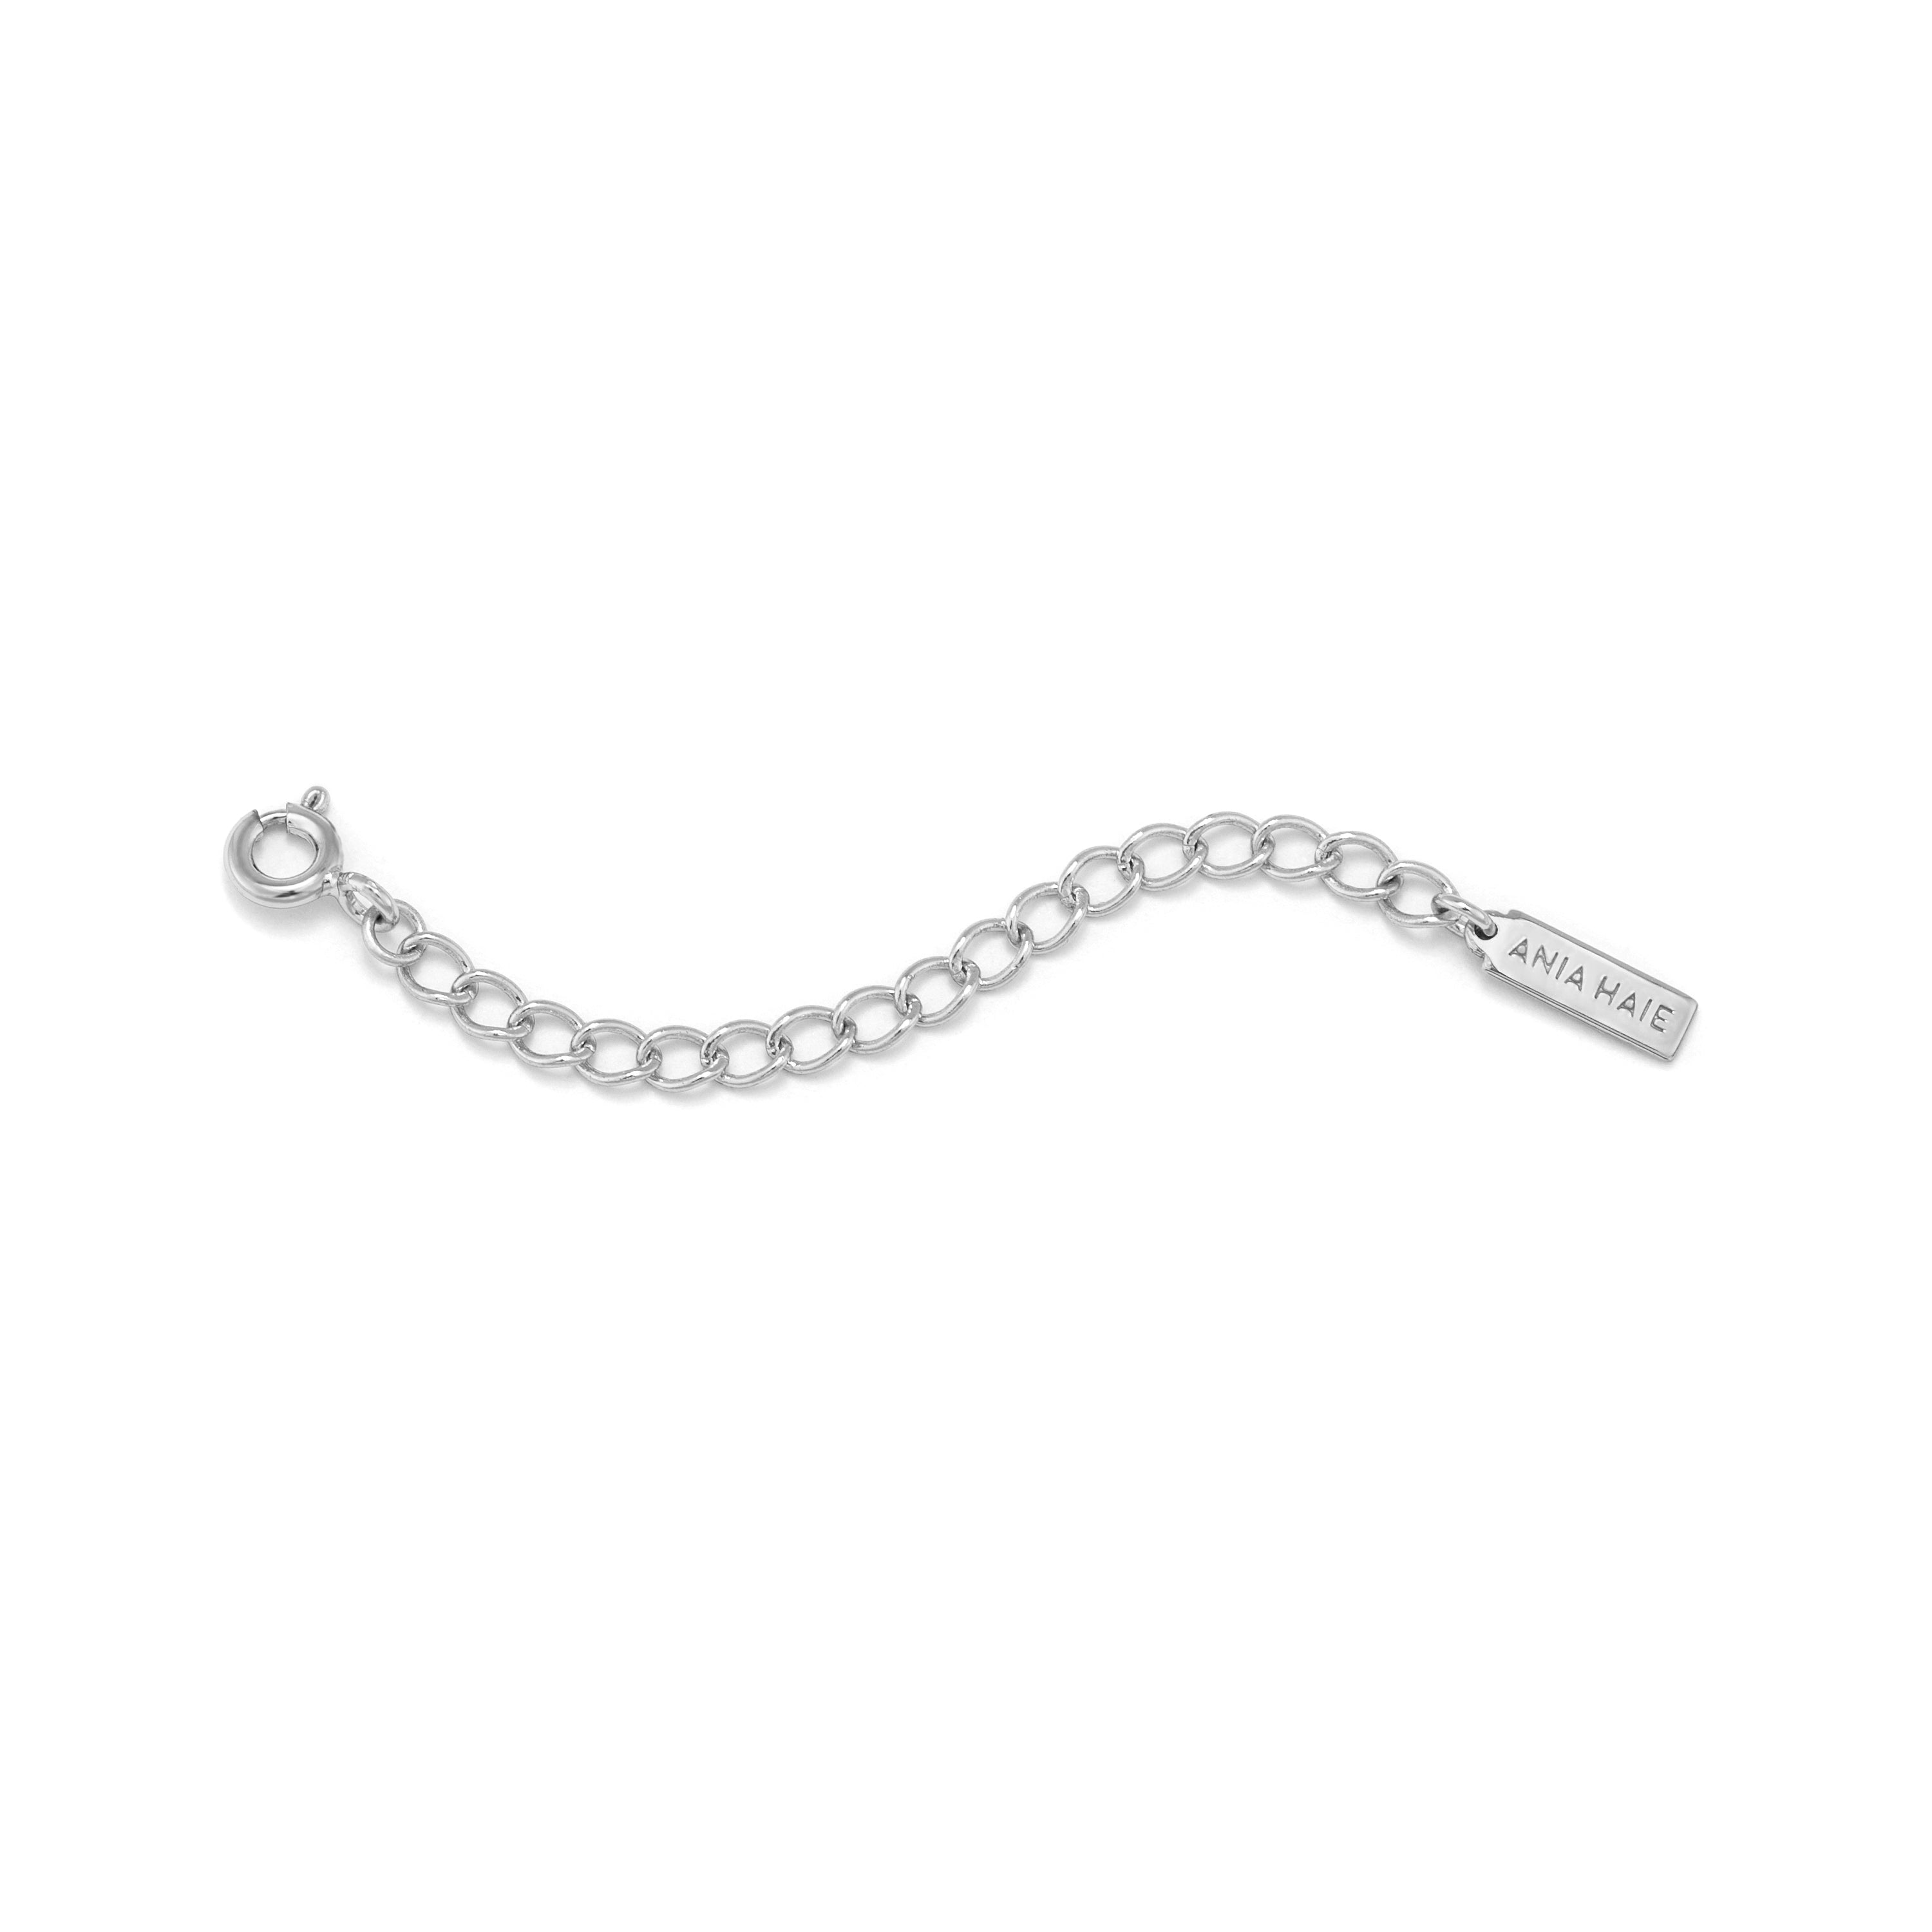 Chain Extensions Necklaces  Rhodium Plated Chain Extension